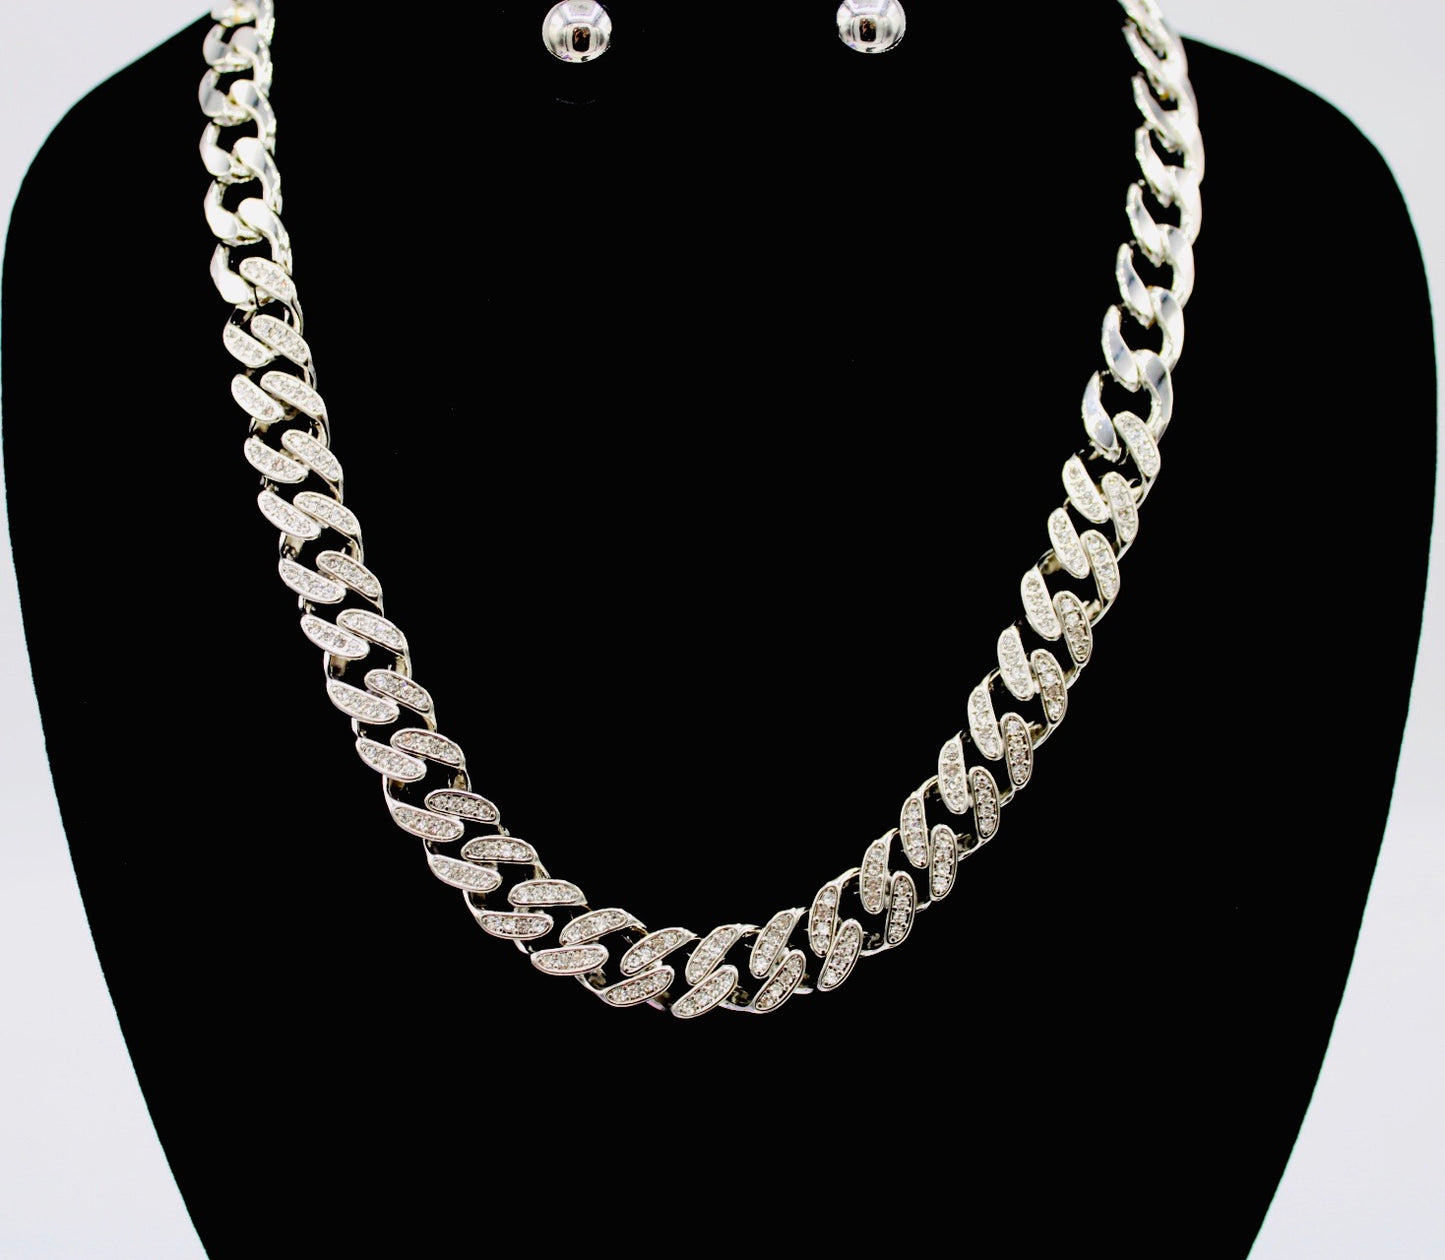 Chain Link Necklace with Stud earrings - Monique Fashion Accessories